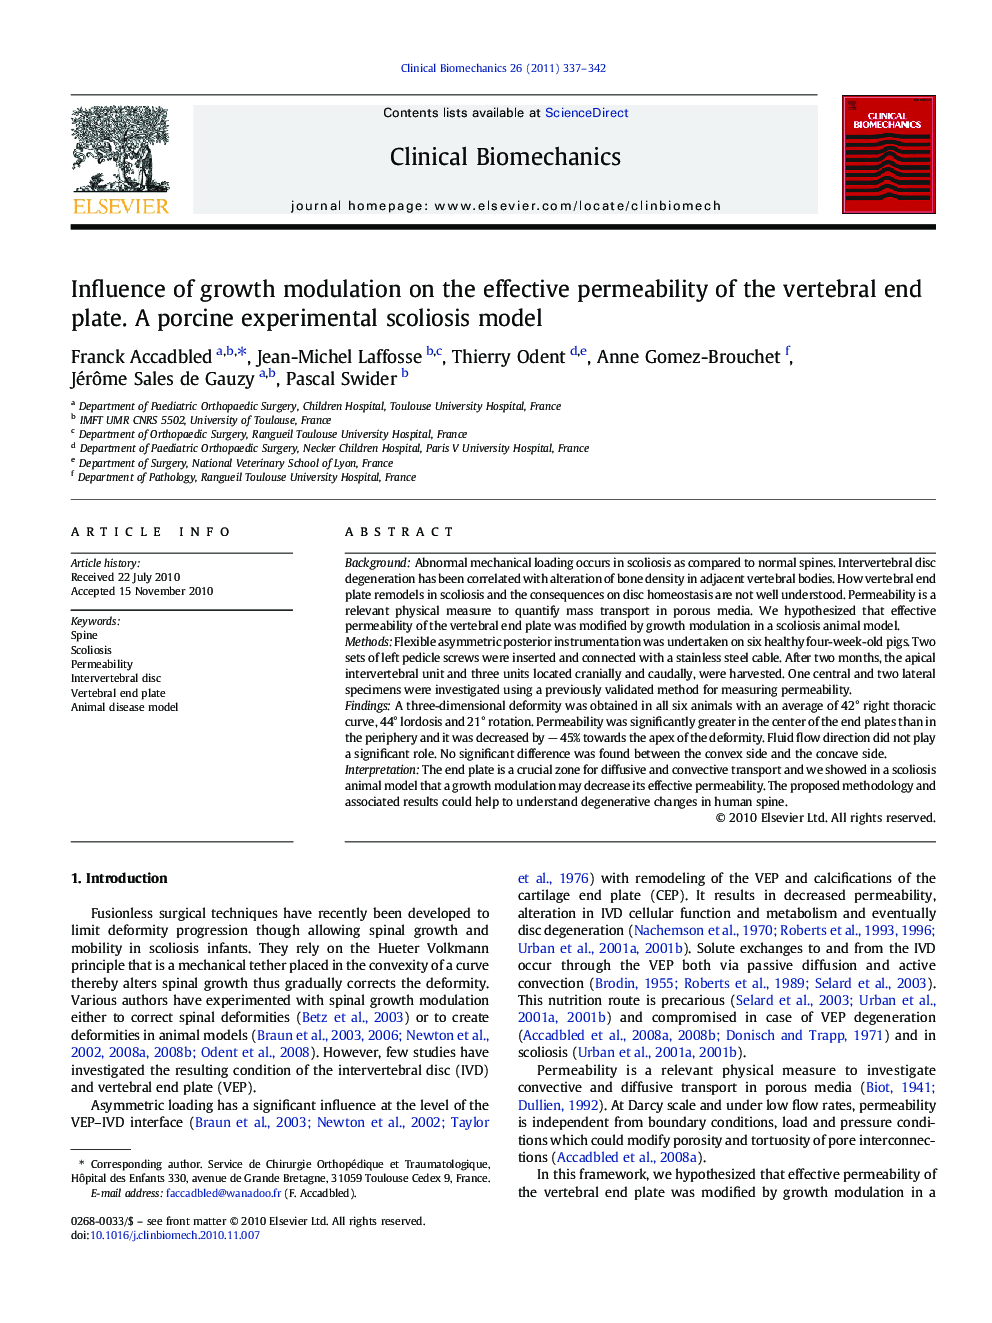 Influence of growth modulation on the effective permeability of the vertebral end plate. A porcine experimental scoliosis model